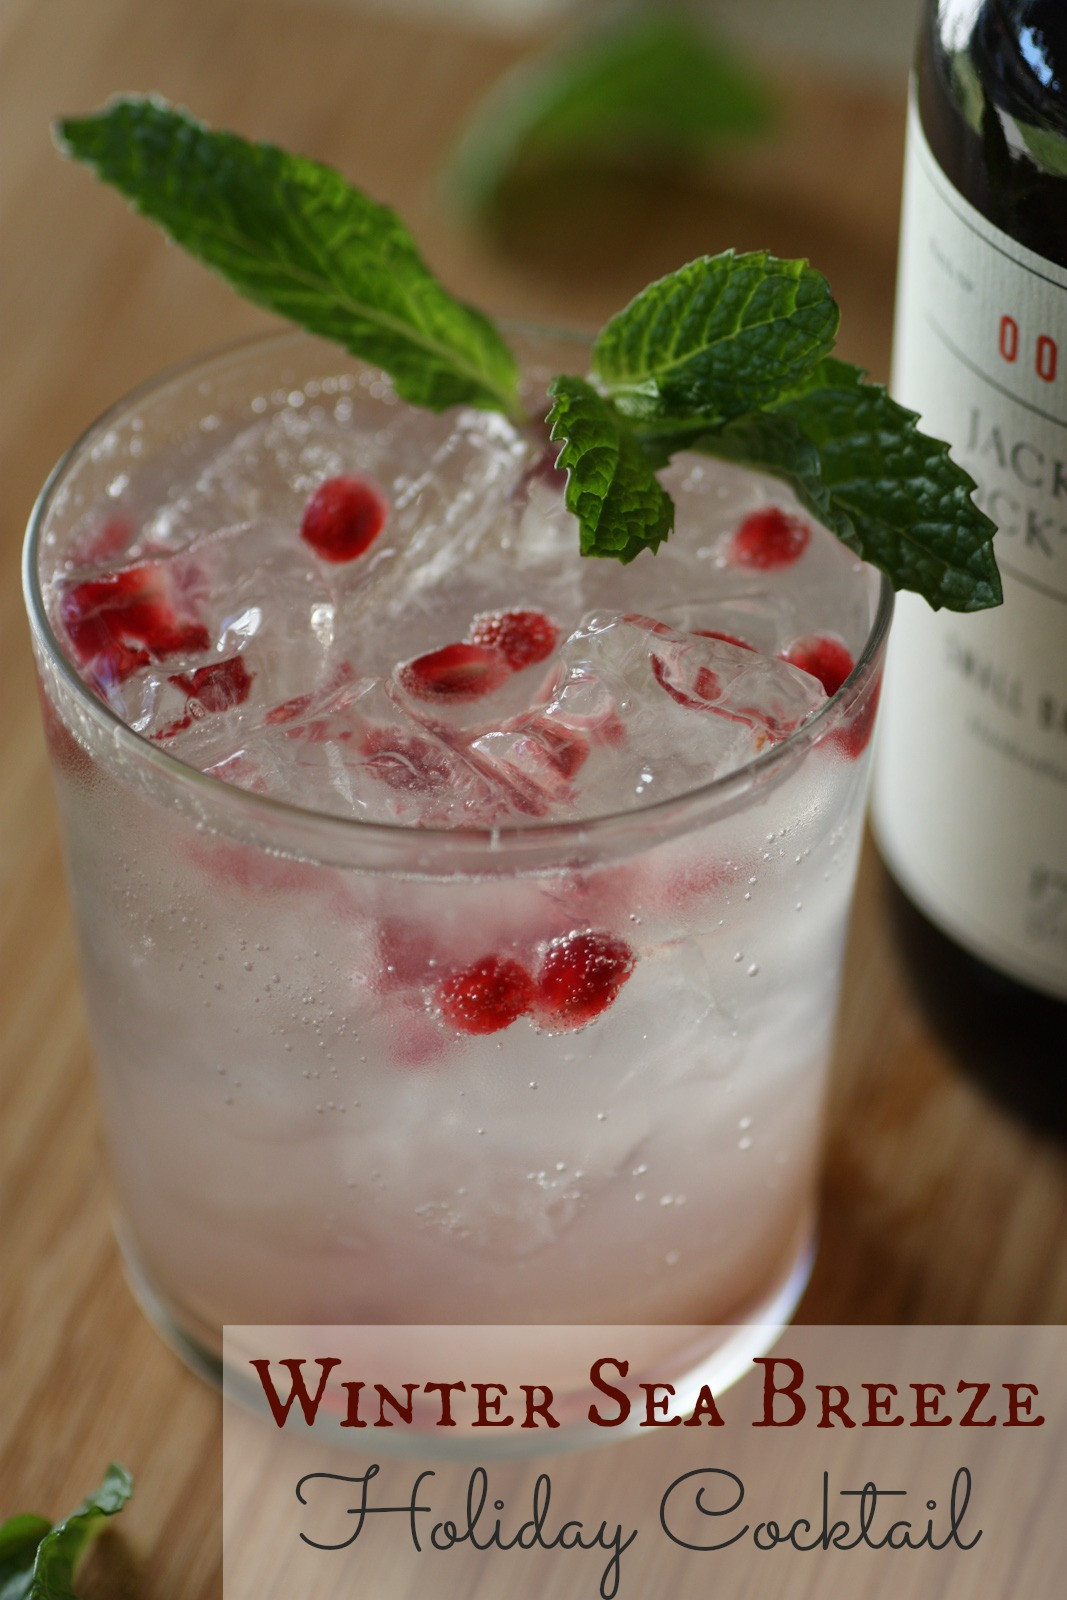 Holiday Drinks With Vodka
 Make This Delicious Winter Sea Breeze Holiday Cocktail